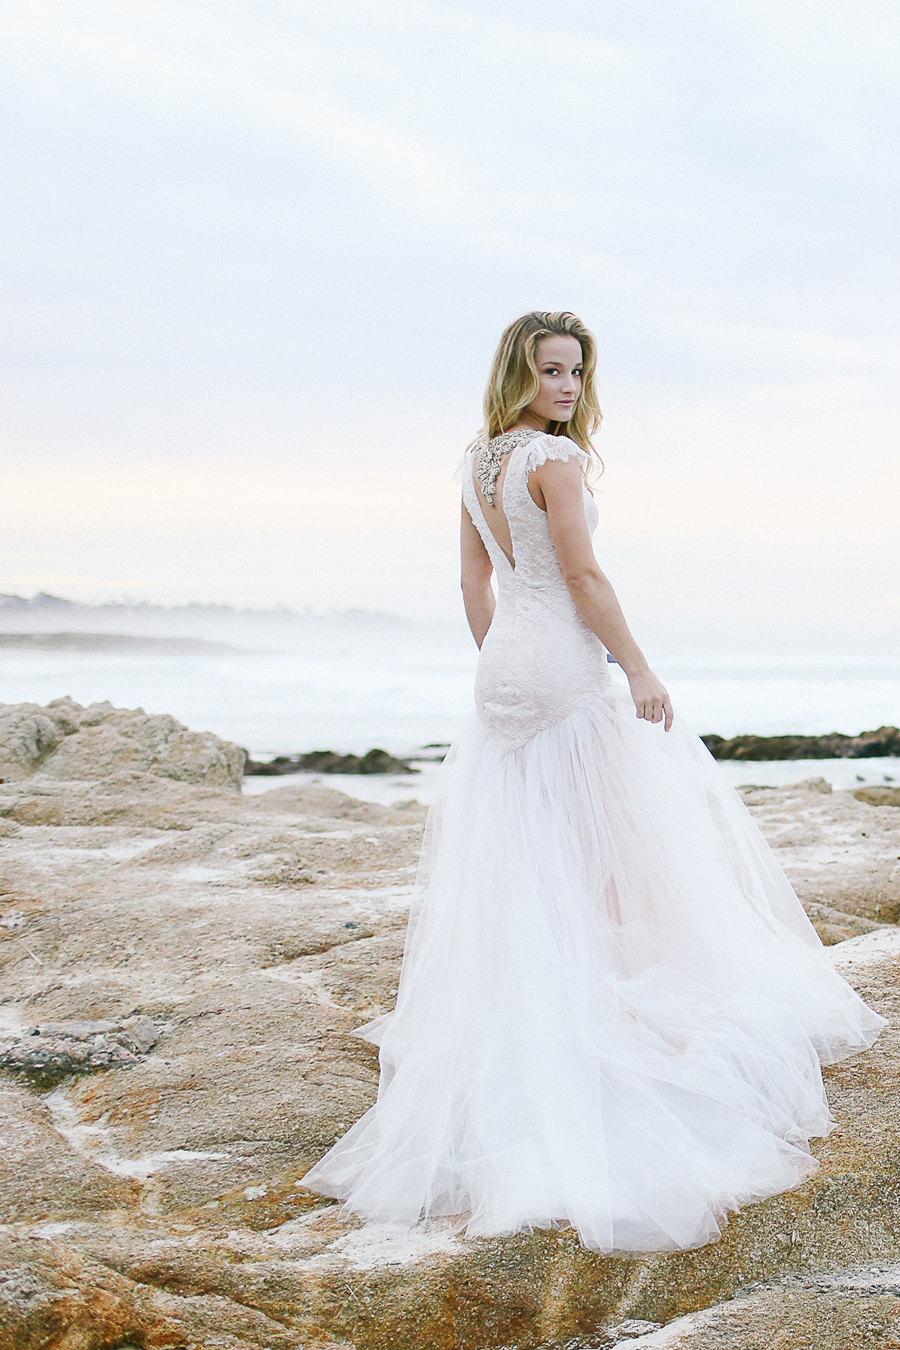 Wedding - Tulle wedding dress, wedding gown, lace dress, beach wedding, glamorous and sexy, sleeves, fit and flare gown for untraditional brides